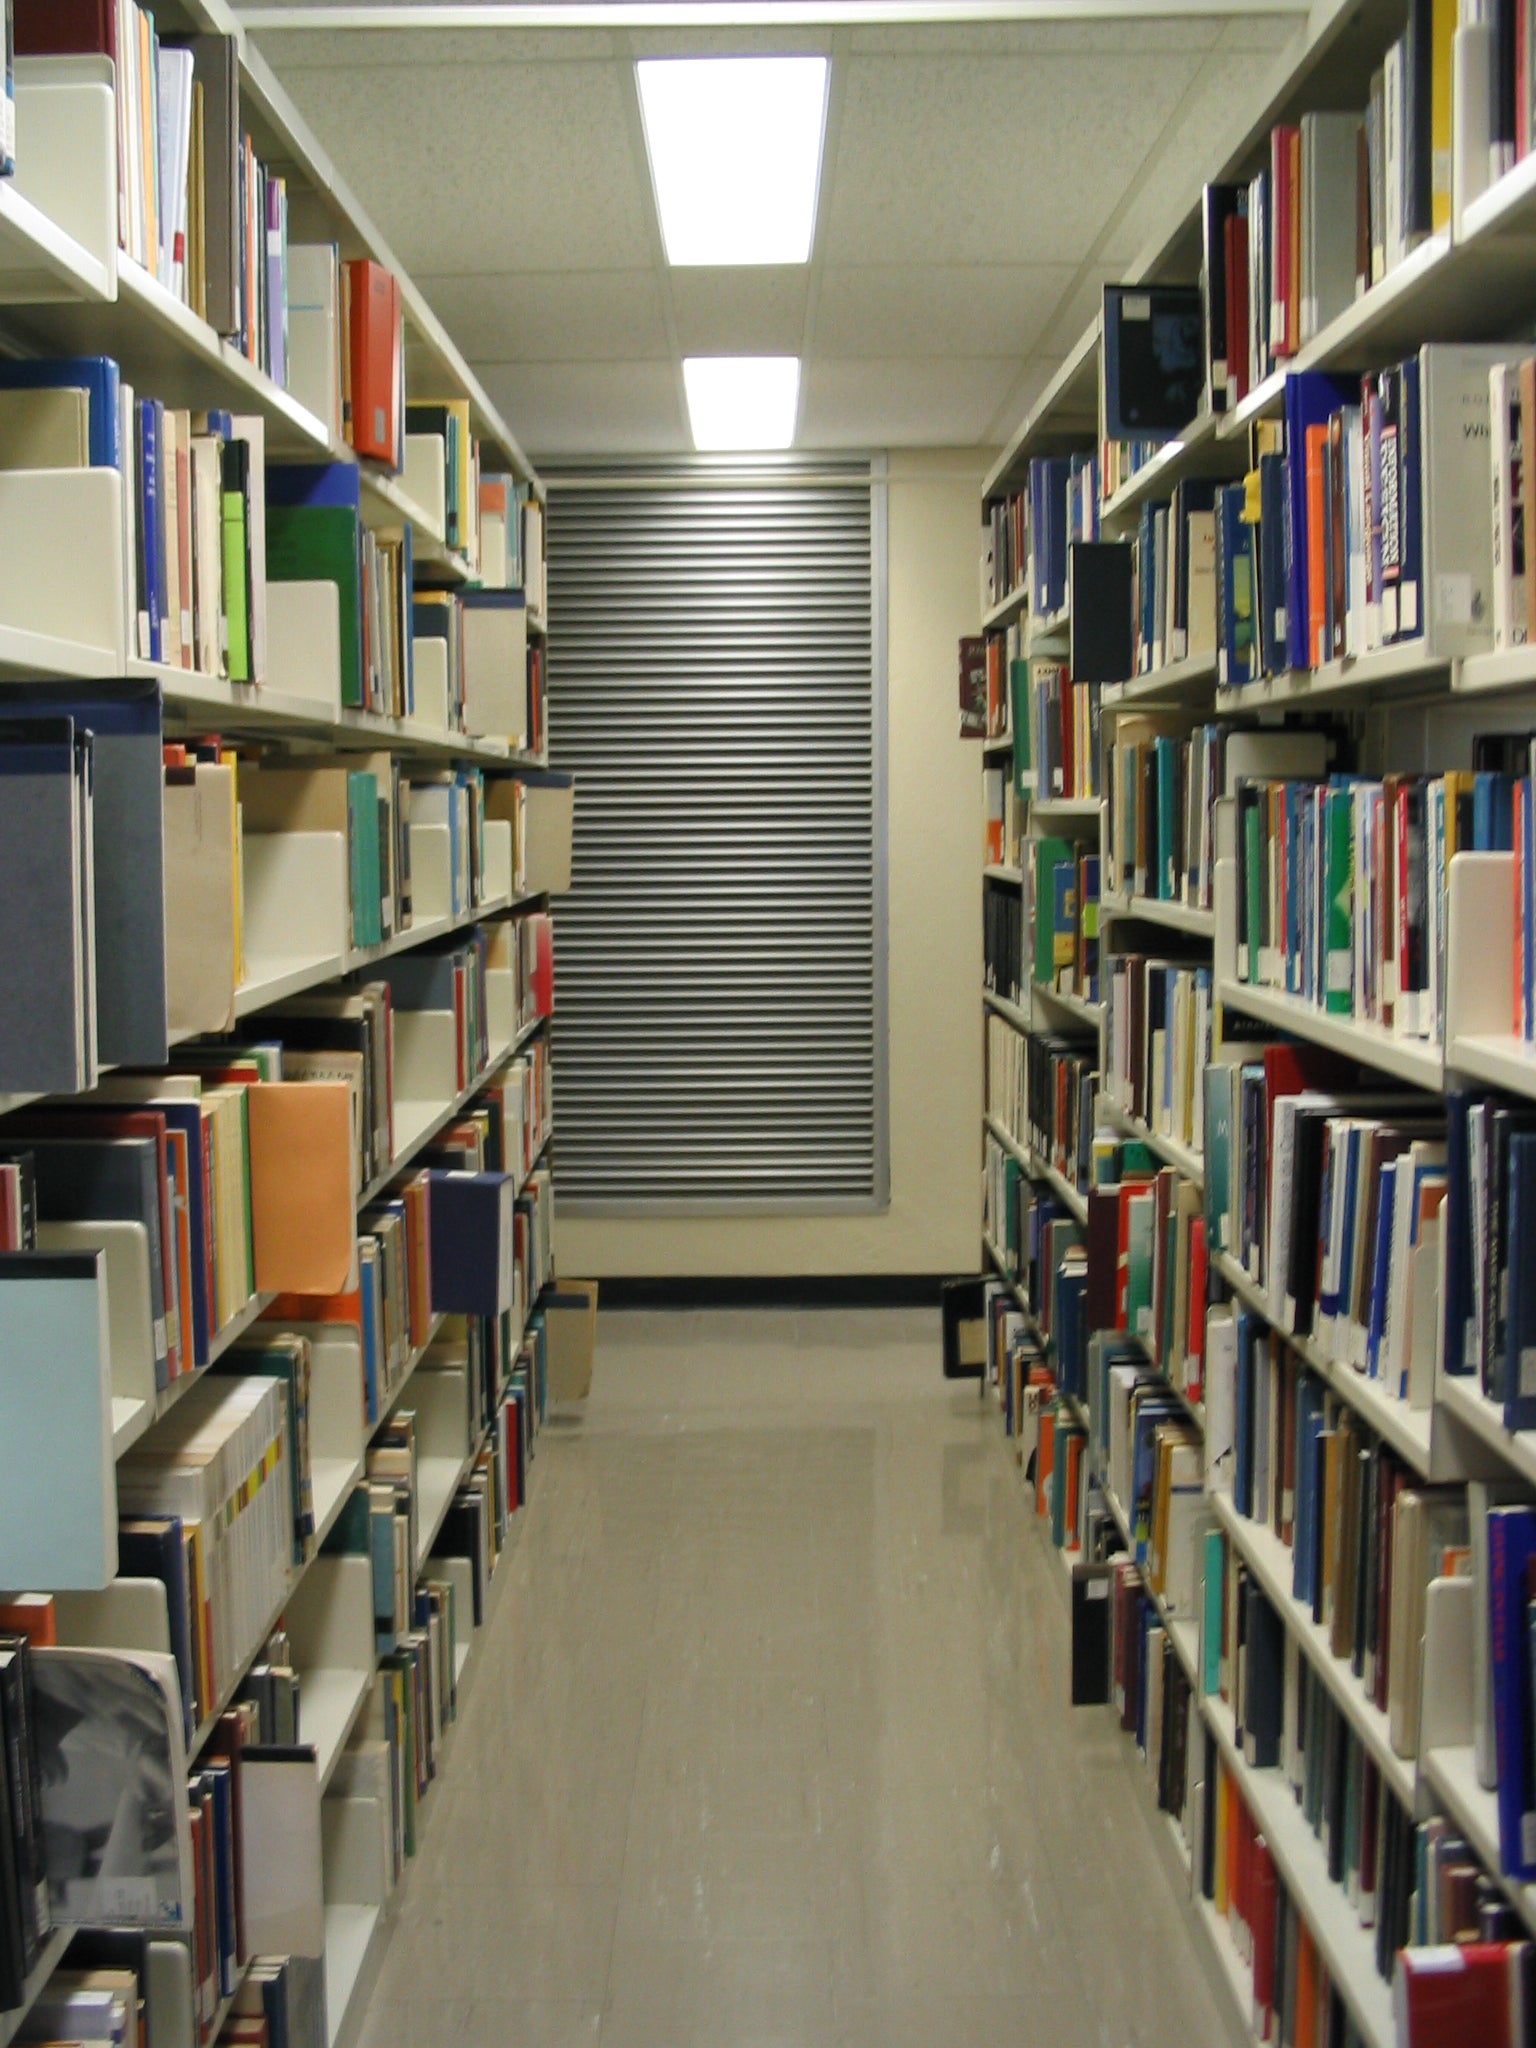 A row of books in the Dana Porter Library